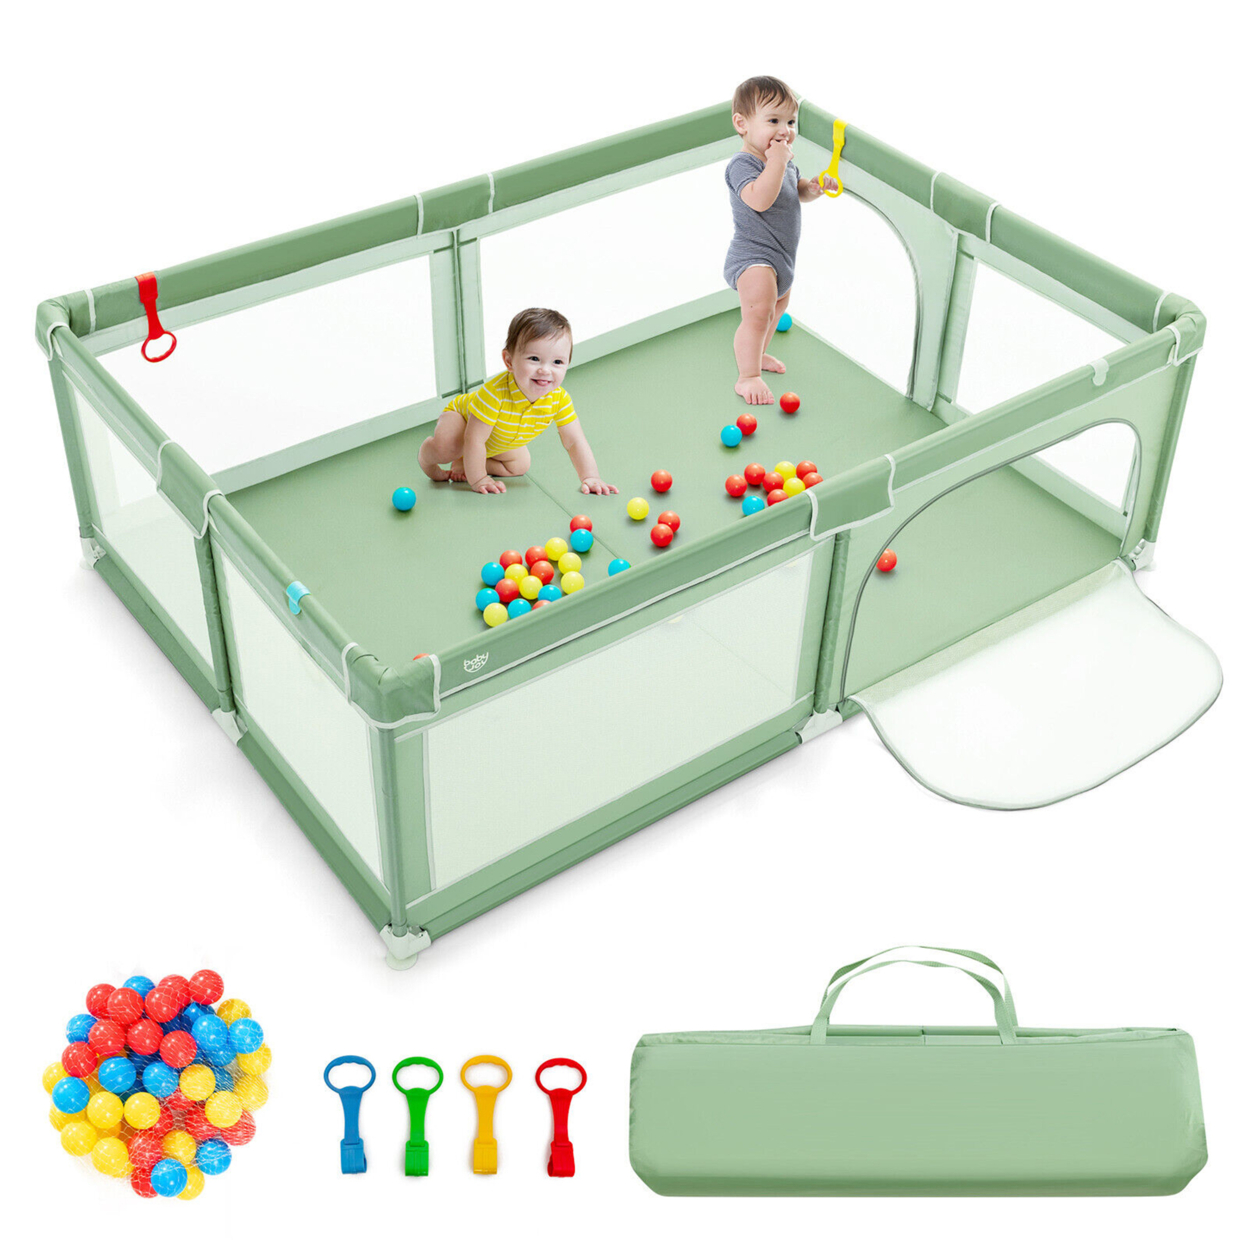 Gymax Baby Playpen Extra-Large Safety Baby Fence W/ Ocean Balls & Rings - Green